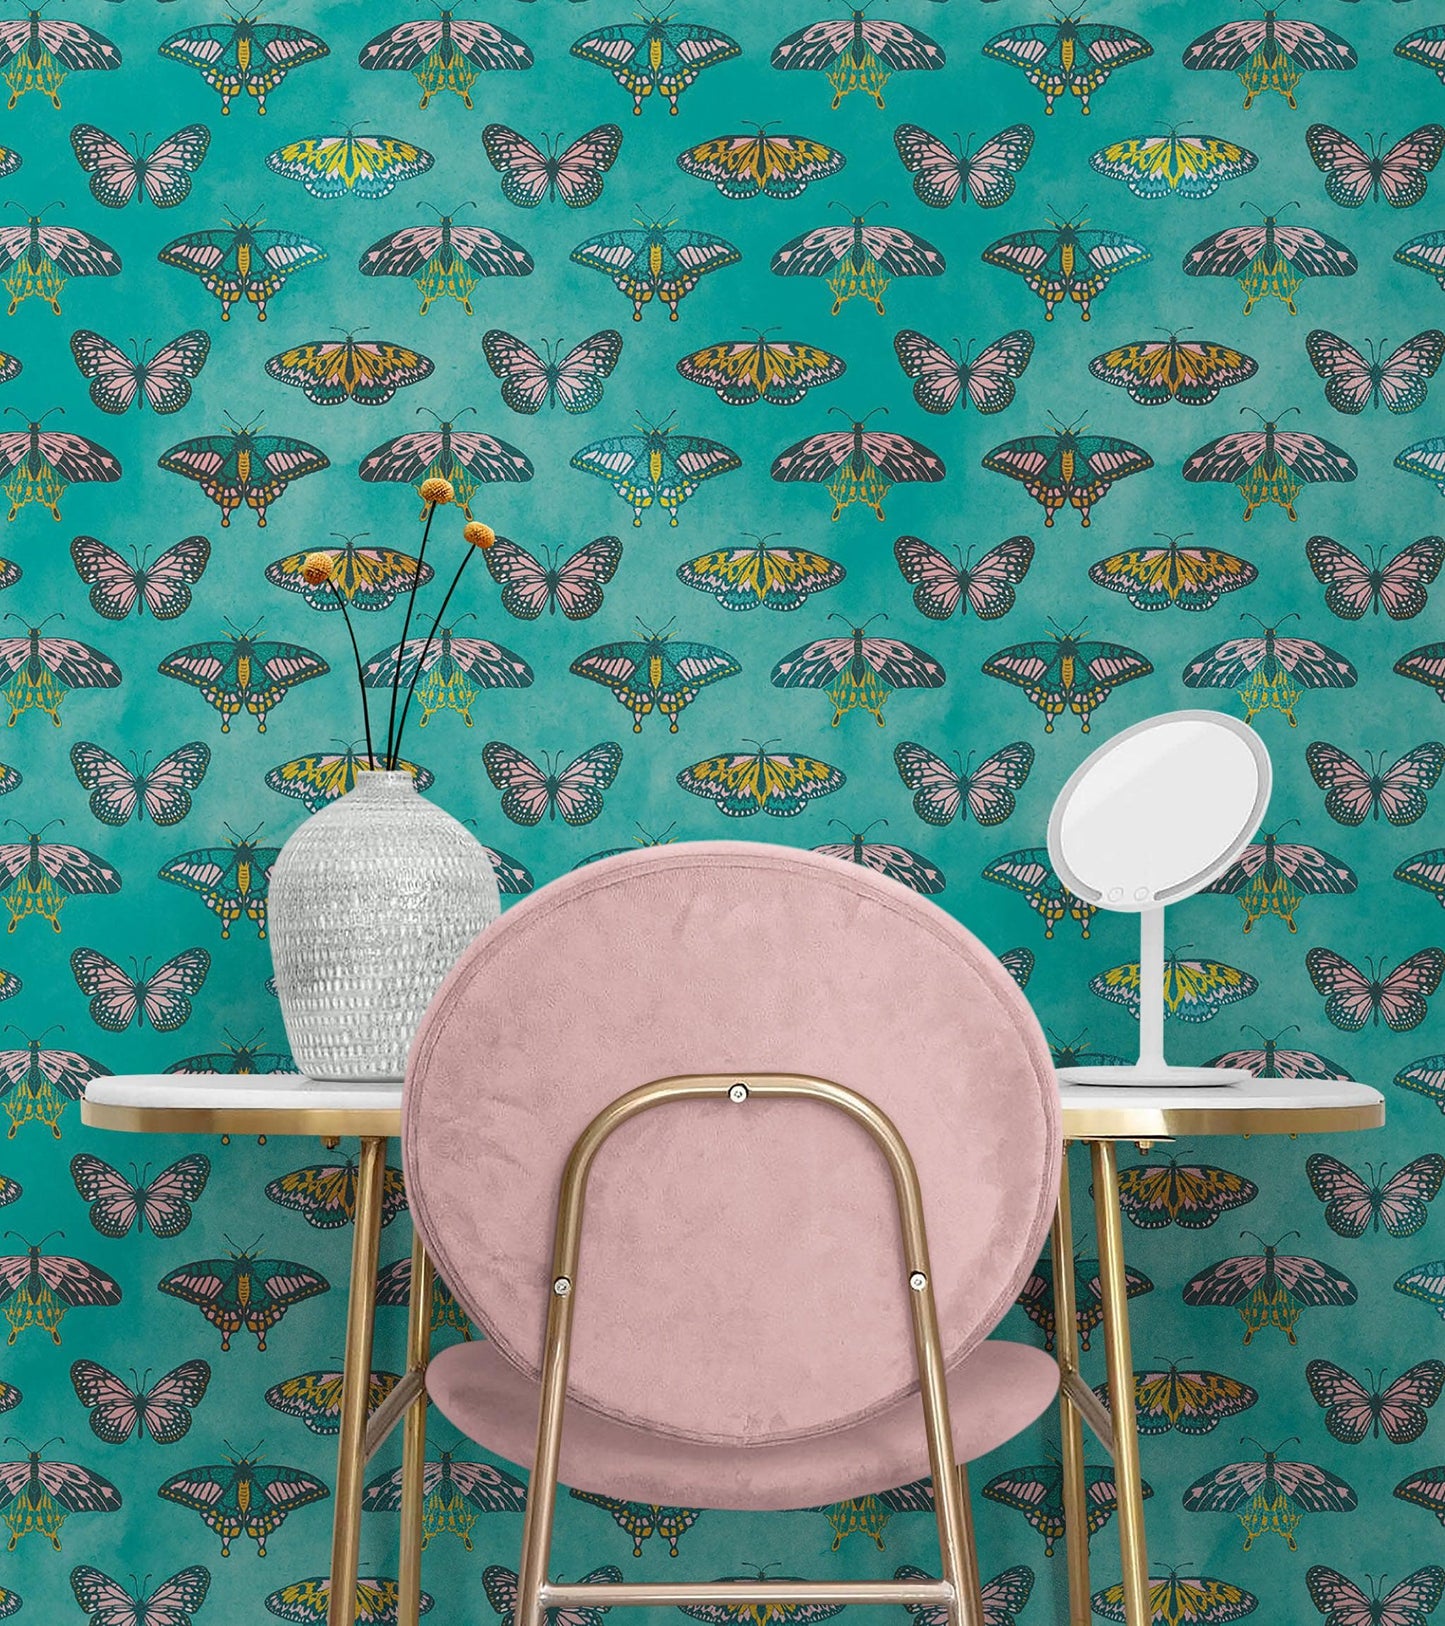 Butterfly Pattern on Green Background Wall Mural. Retro Green, Pink and Gold Color Illustration Design. Bedroom, Nursery, Home Decor. Peel and Stick Wallpaper. #6440